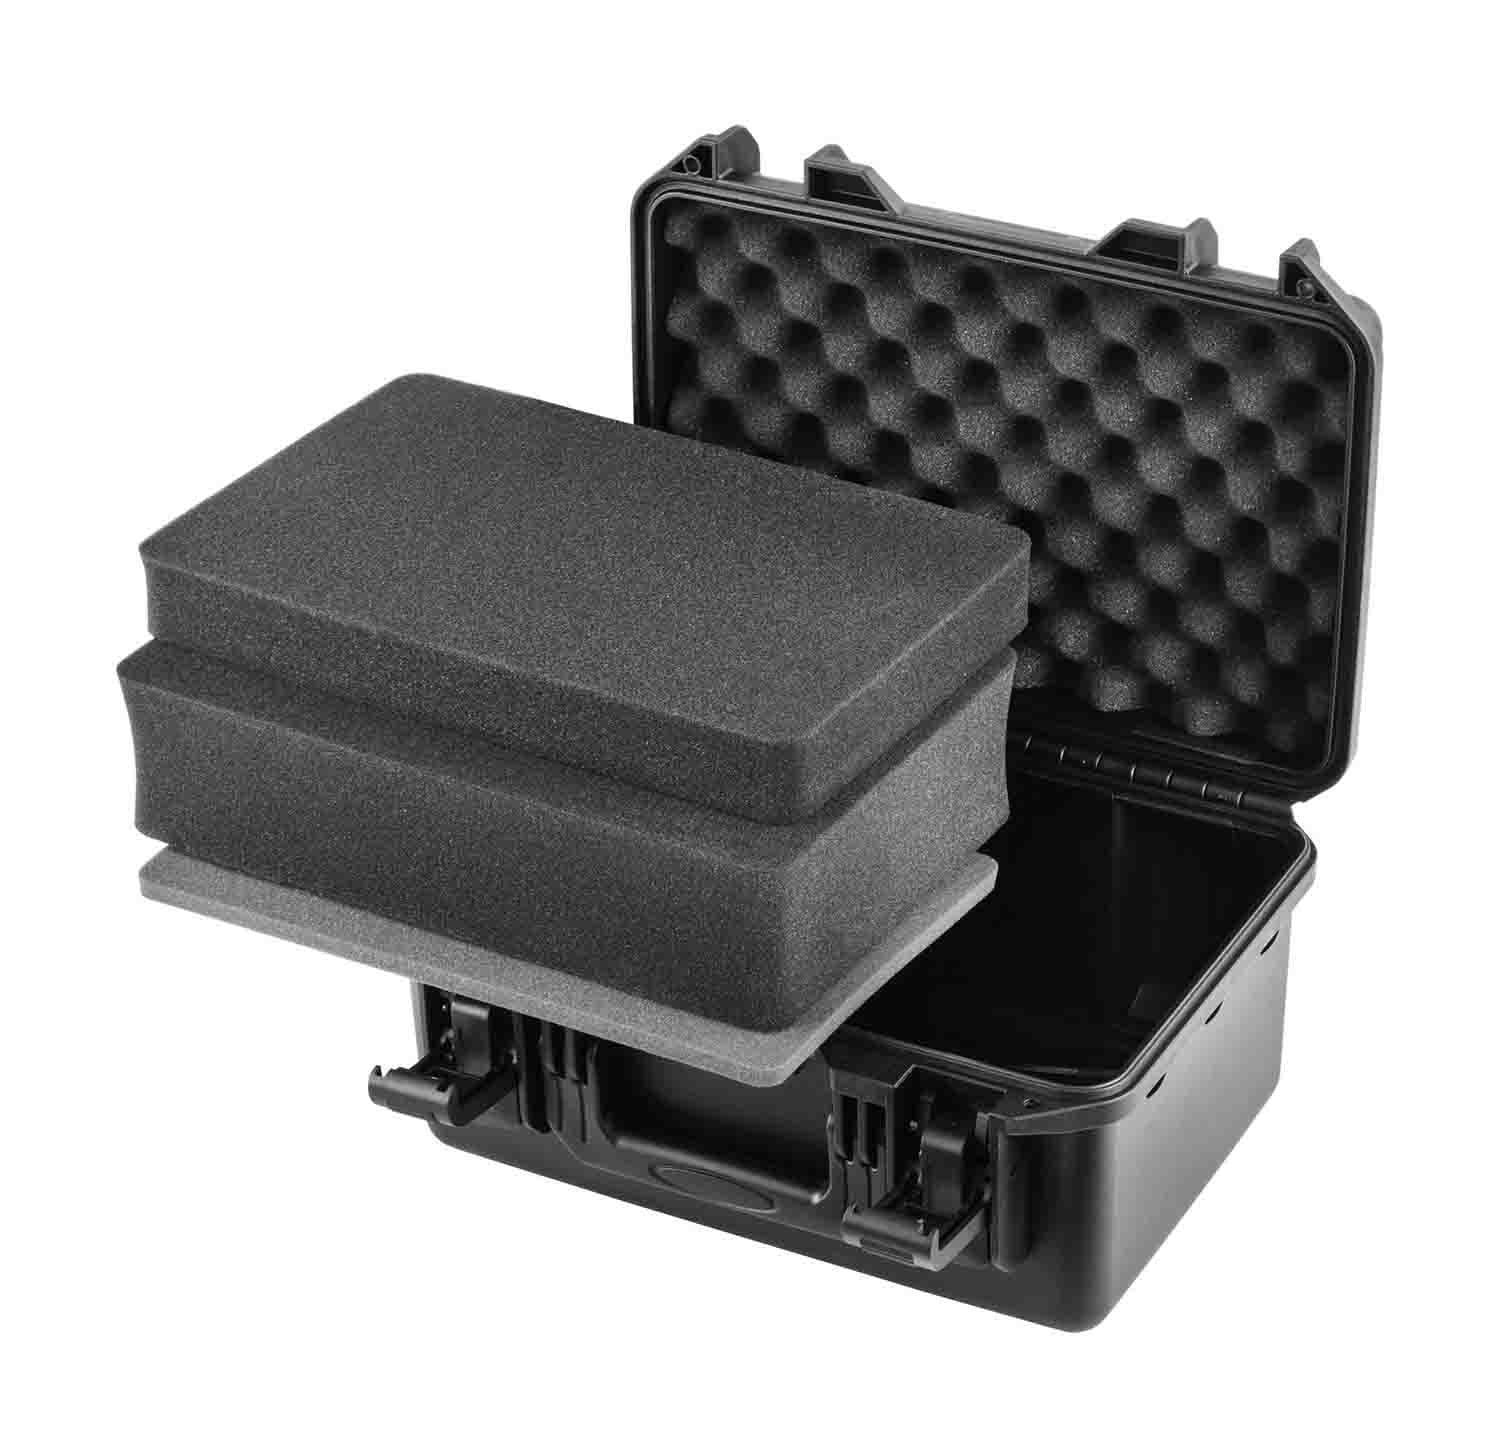 Odyssey VU120806 Vulcan Injection-Molded Utility Case with Pluck Foam - 13 x 8.25 x 5" Interior - Hollywood DJ